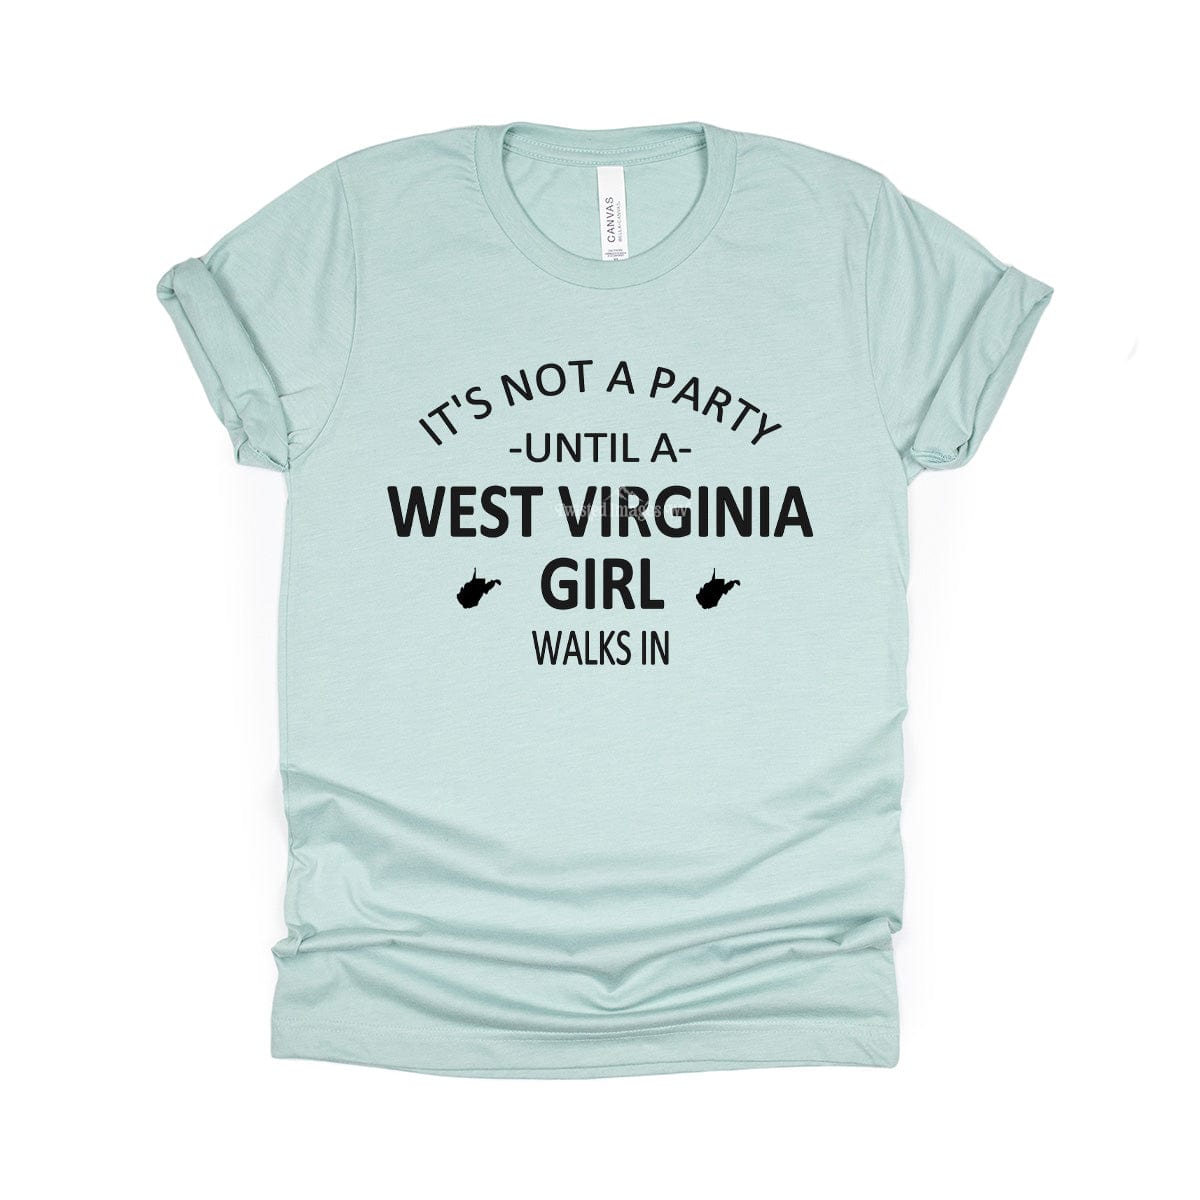 Not a Party Until a West Virginia Girl Walks In T-shirt